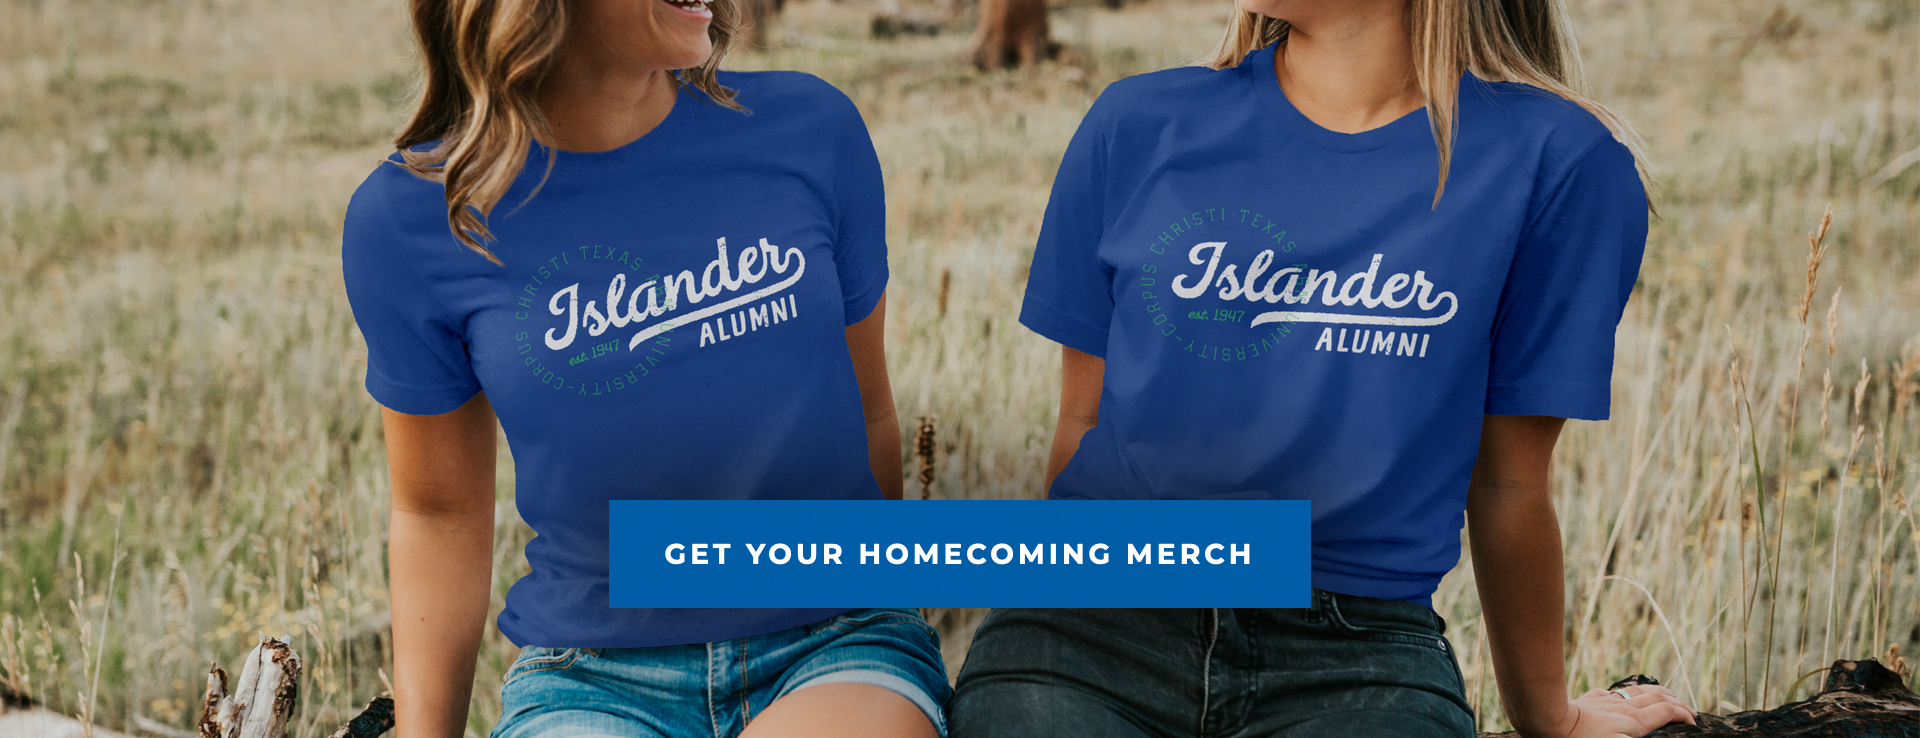 Get Your Homecoming Merch